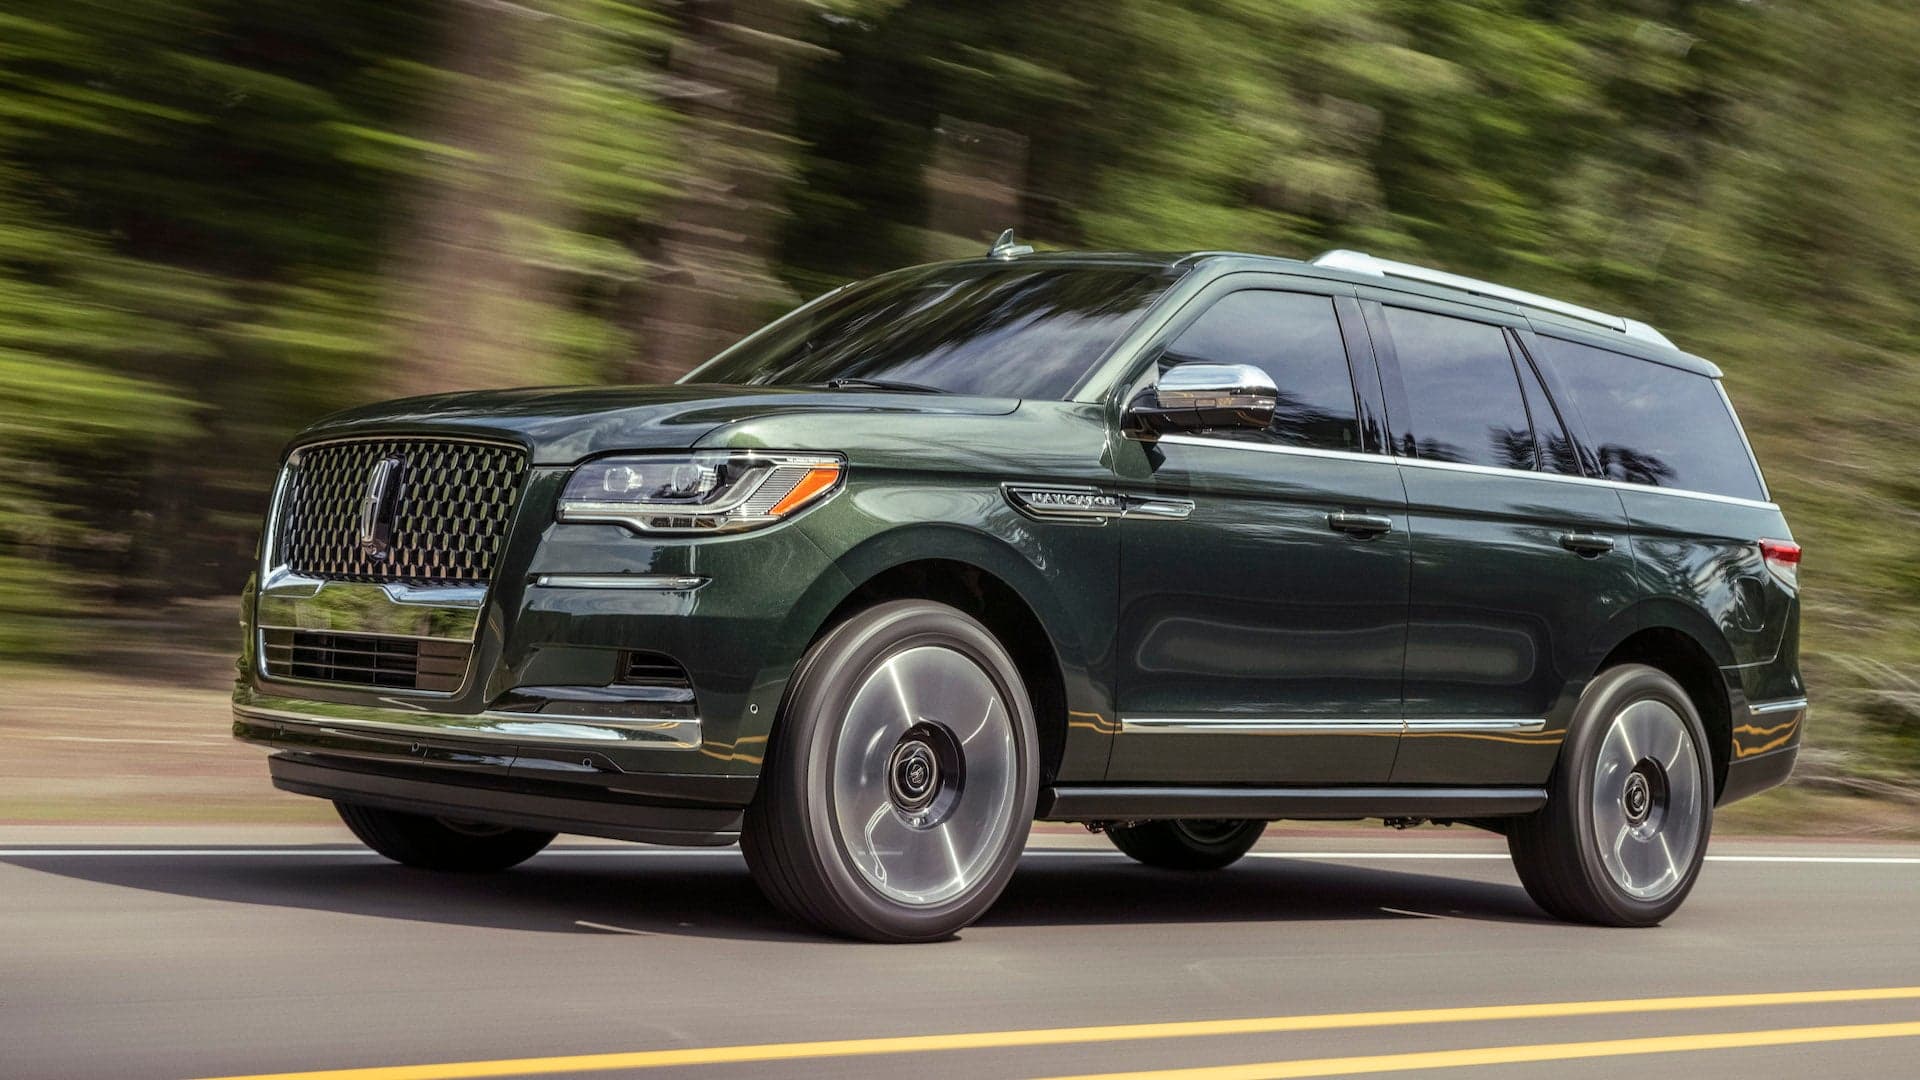 2022 Lincoln Navigator: ActiveGlide Hands-Free Driving and a Better Seat Massage